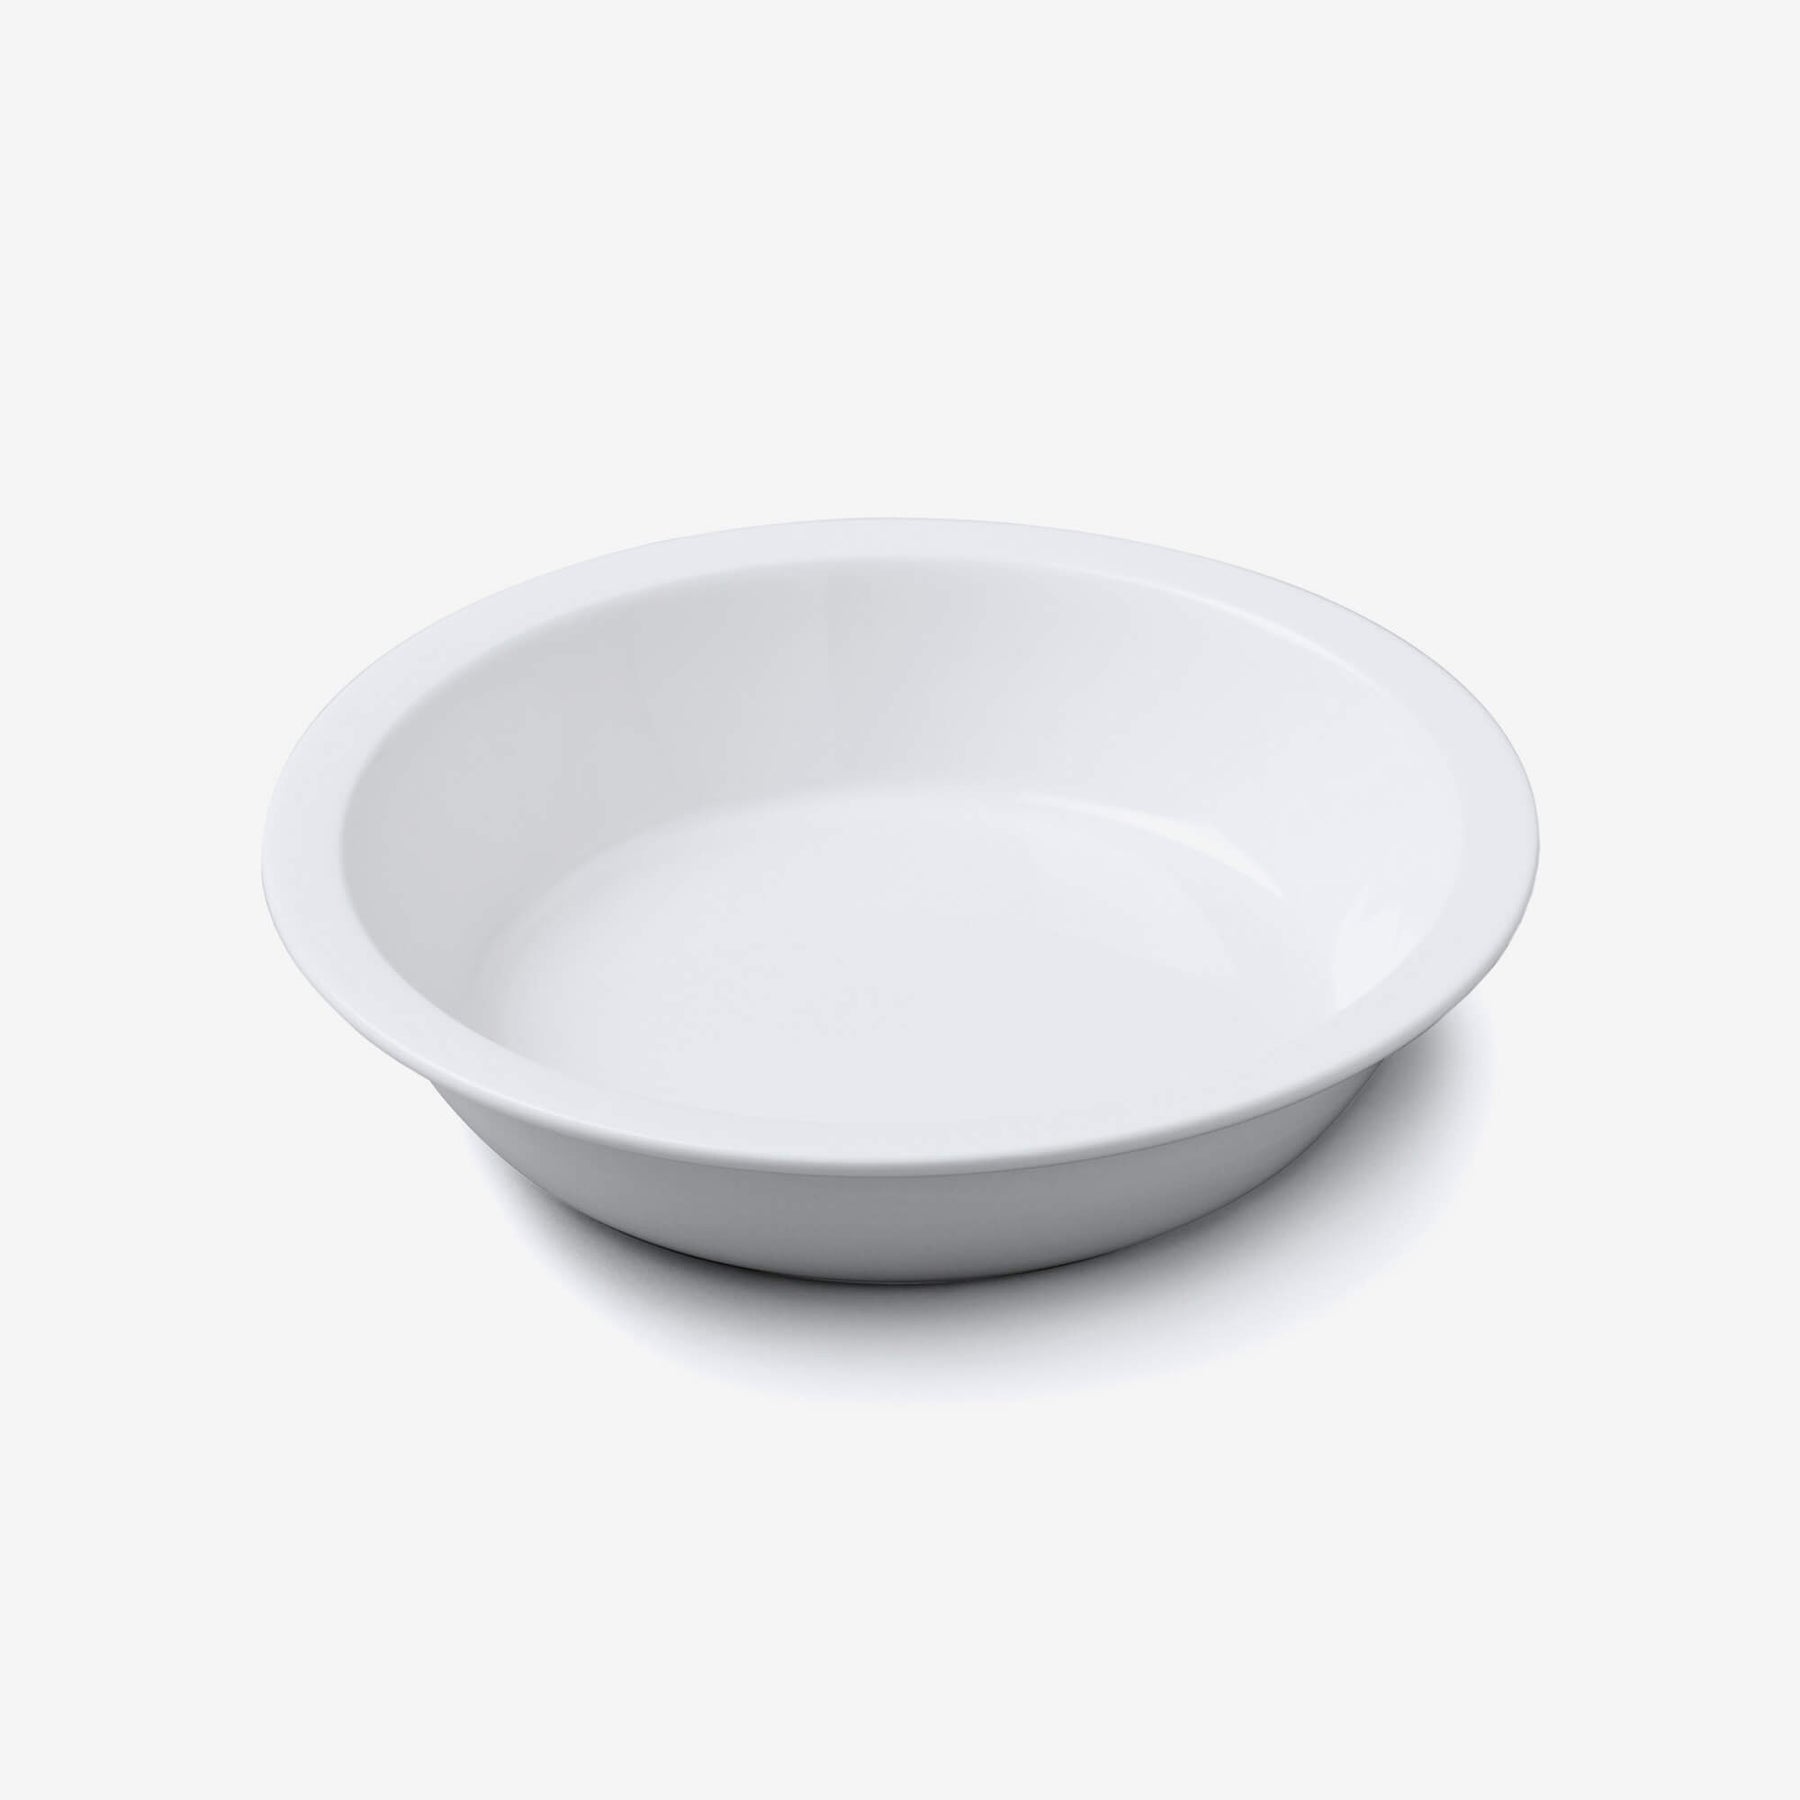 Porcelain Round Straight Edge Pie Dish, Available in 2 Sizes